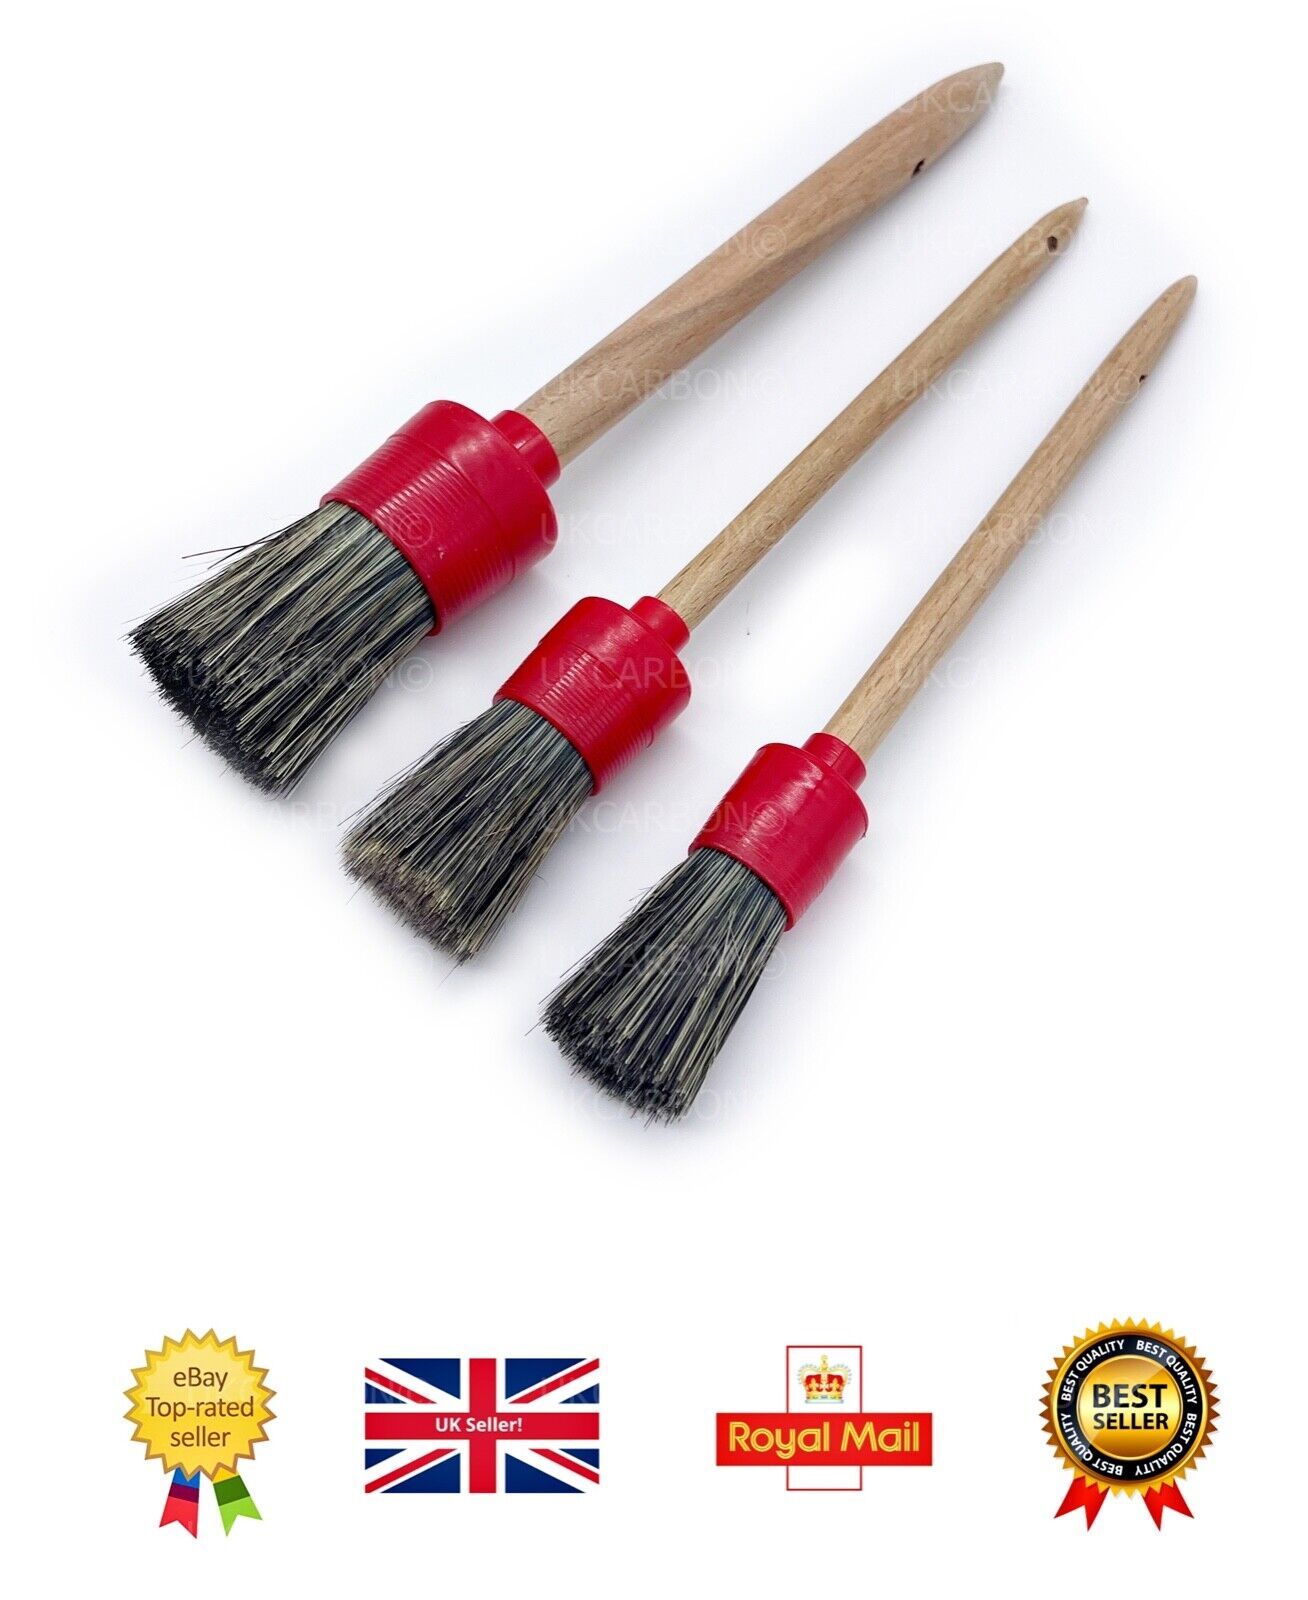 Car Valet Interior Alloy Wheel Cleaning Detailing REAL Boar Hair Brush Set of 3 - UKCarbon